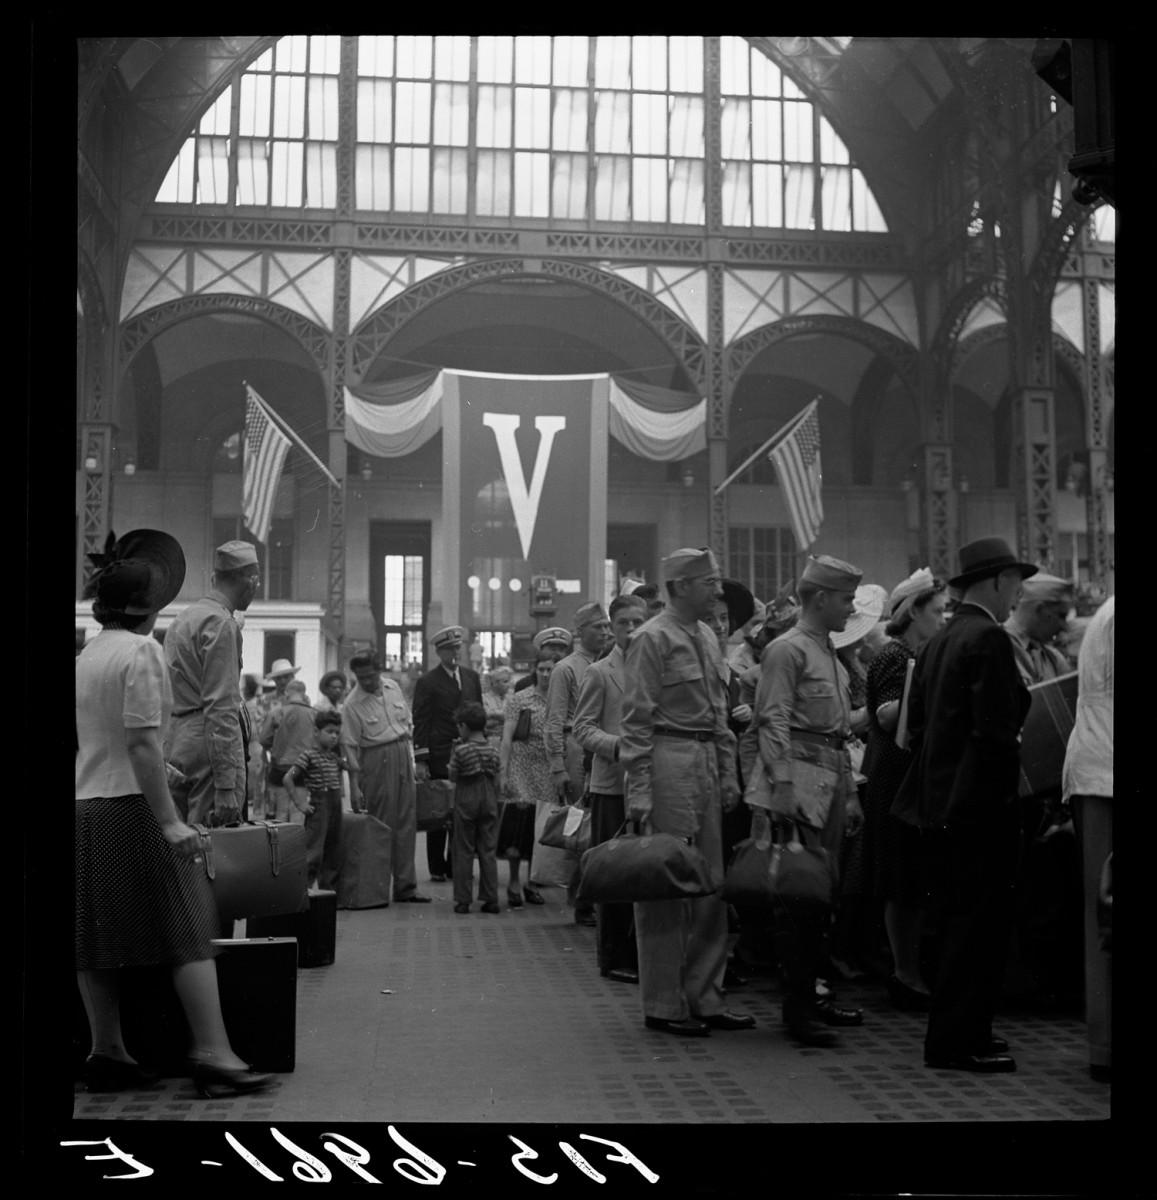 <a><img class="size-large wp-image-1780995" title=" World War II increased traffic in Penn Station 80 percent between 1941 and 1942, as soldiers arrived in the city from across the nation and then left for North Africa and Europe. (Courtesy of the New York Historical Society)" src="https://www.theepochtimes.com/assets/uploads/2015/09/PennStation-NY+Historical+Society.jpg" alt=" World War II increased traffic in Penn Station 80 percent between 1941 and 1942, as soldiers arrived in the city from across the nation and then left for North Africa and Europe. (Courtesy of the New York Historical Society)" width="569" height="590"/></a>